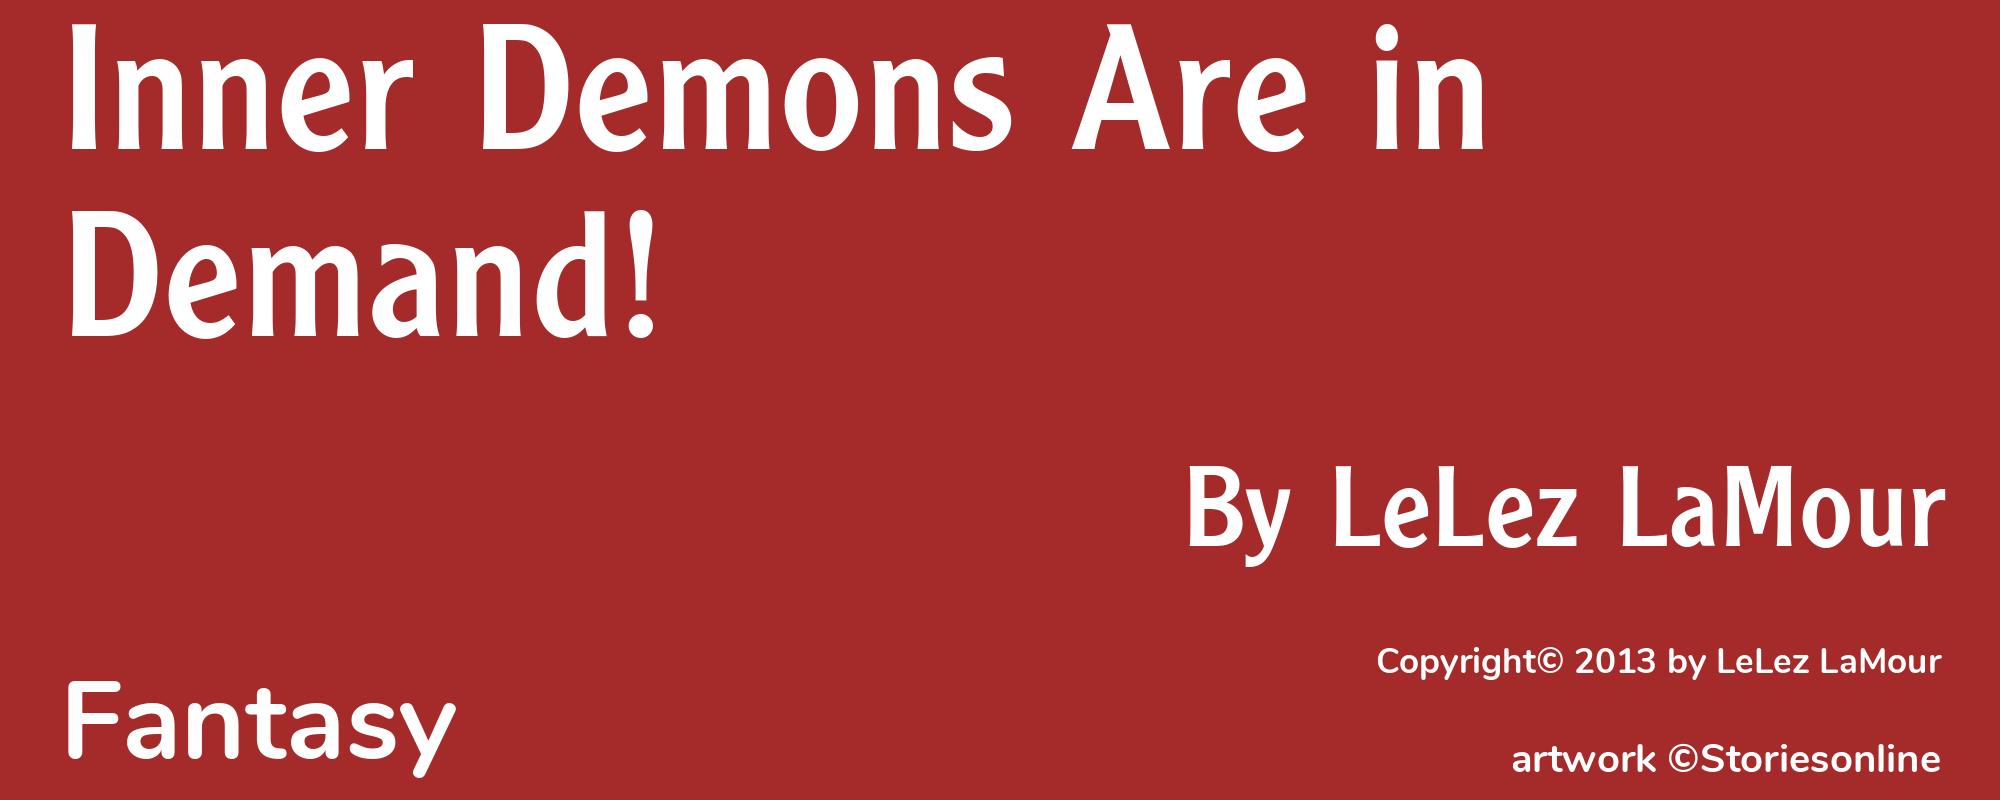 Inner Demons Are in Demand! - Cover